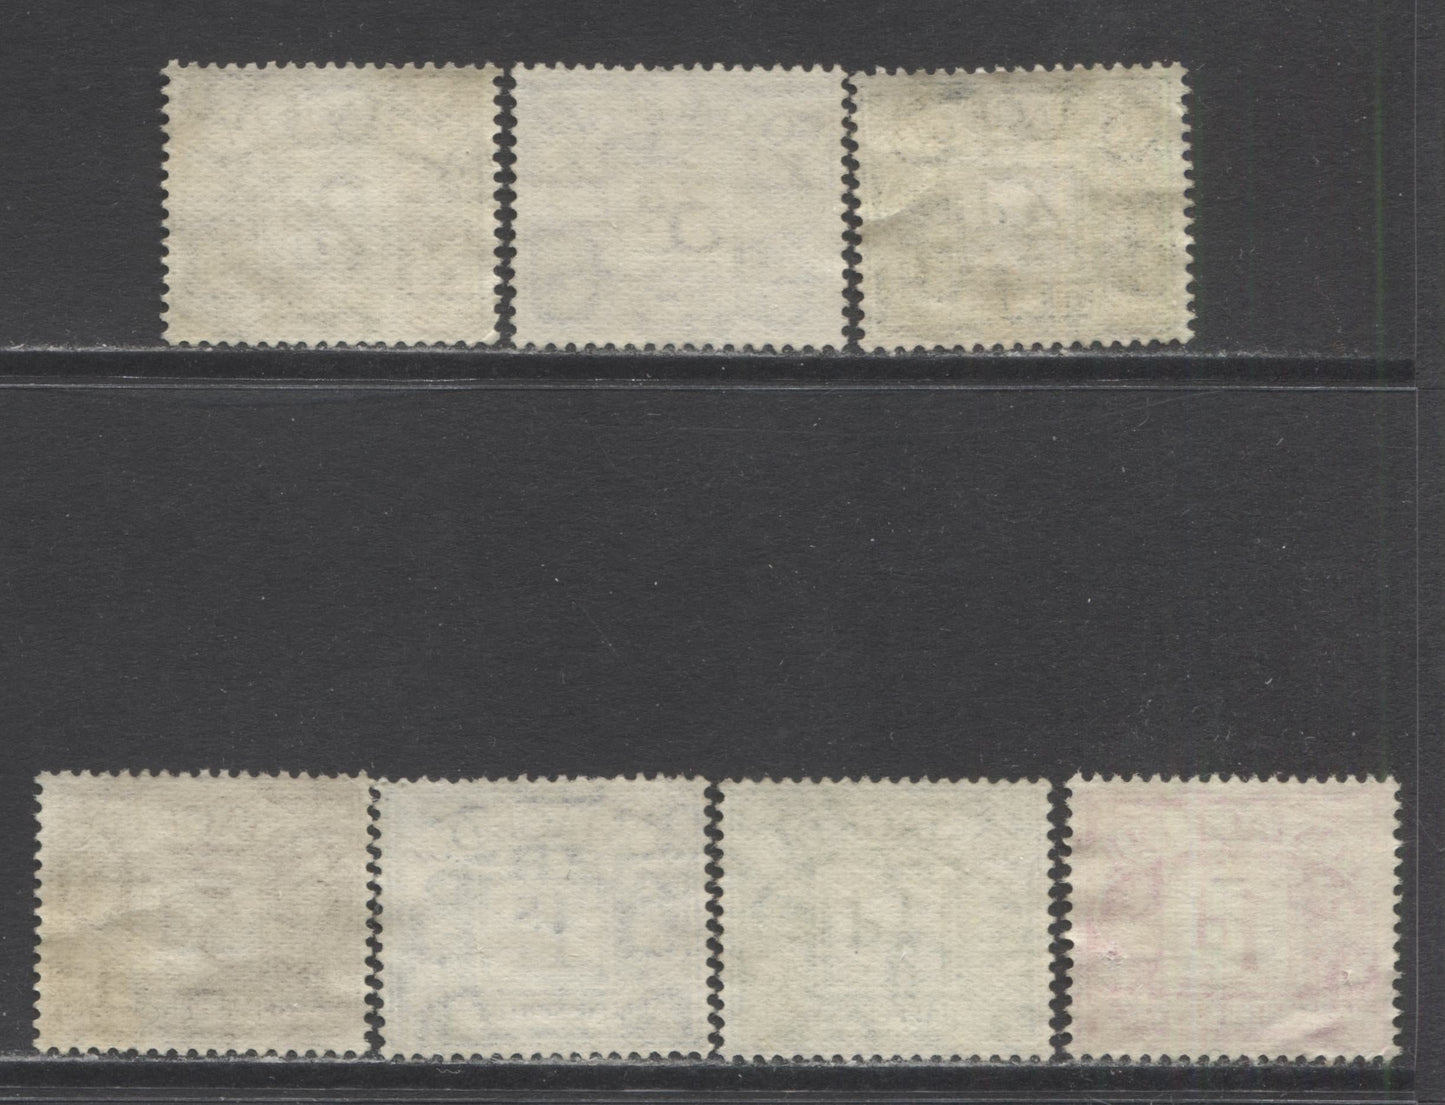 Lot 83 Great Britain SC#J20/J27 1936-1939 Postage Dues With GVI Block Watermark, A F/VF Unused Range Of Singles, 2017 Scott Cat. $15 USD, Click on Listing to See ALL Pictures